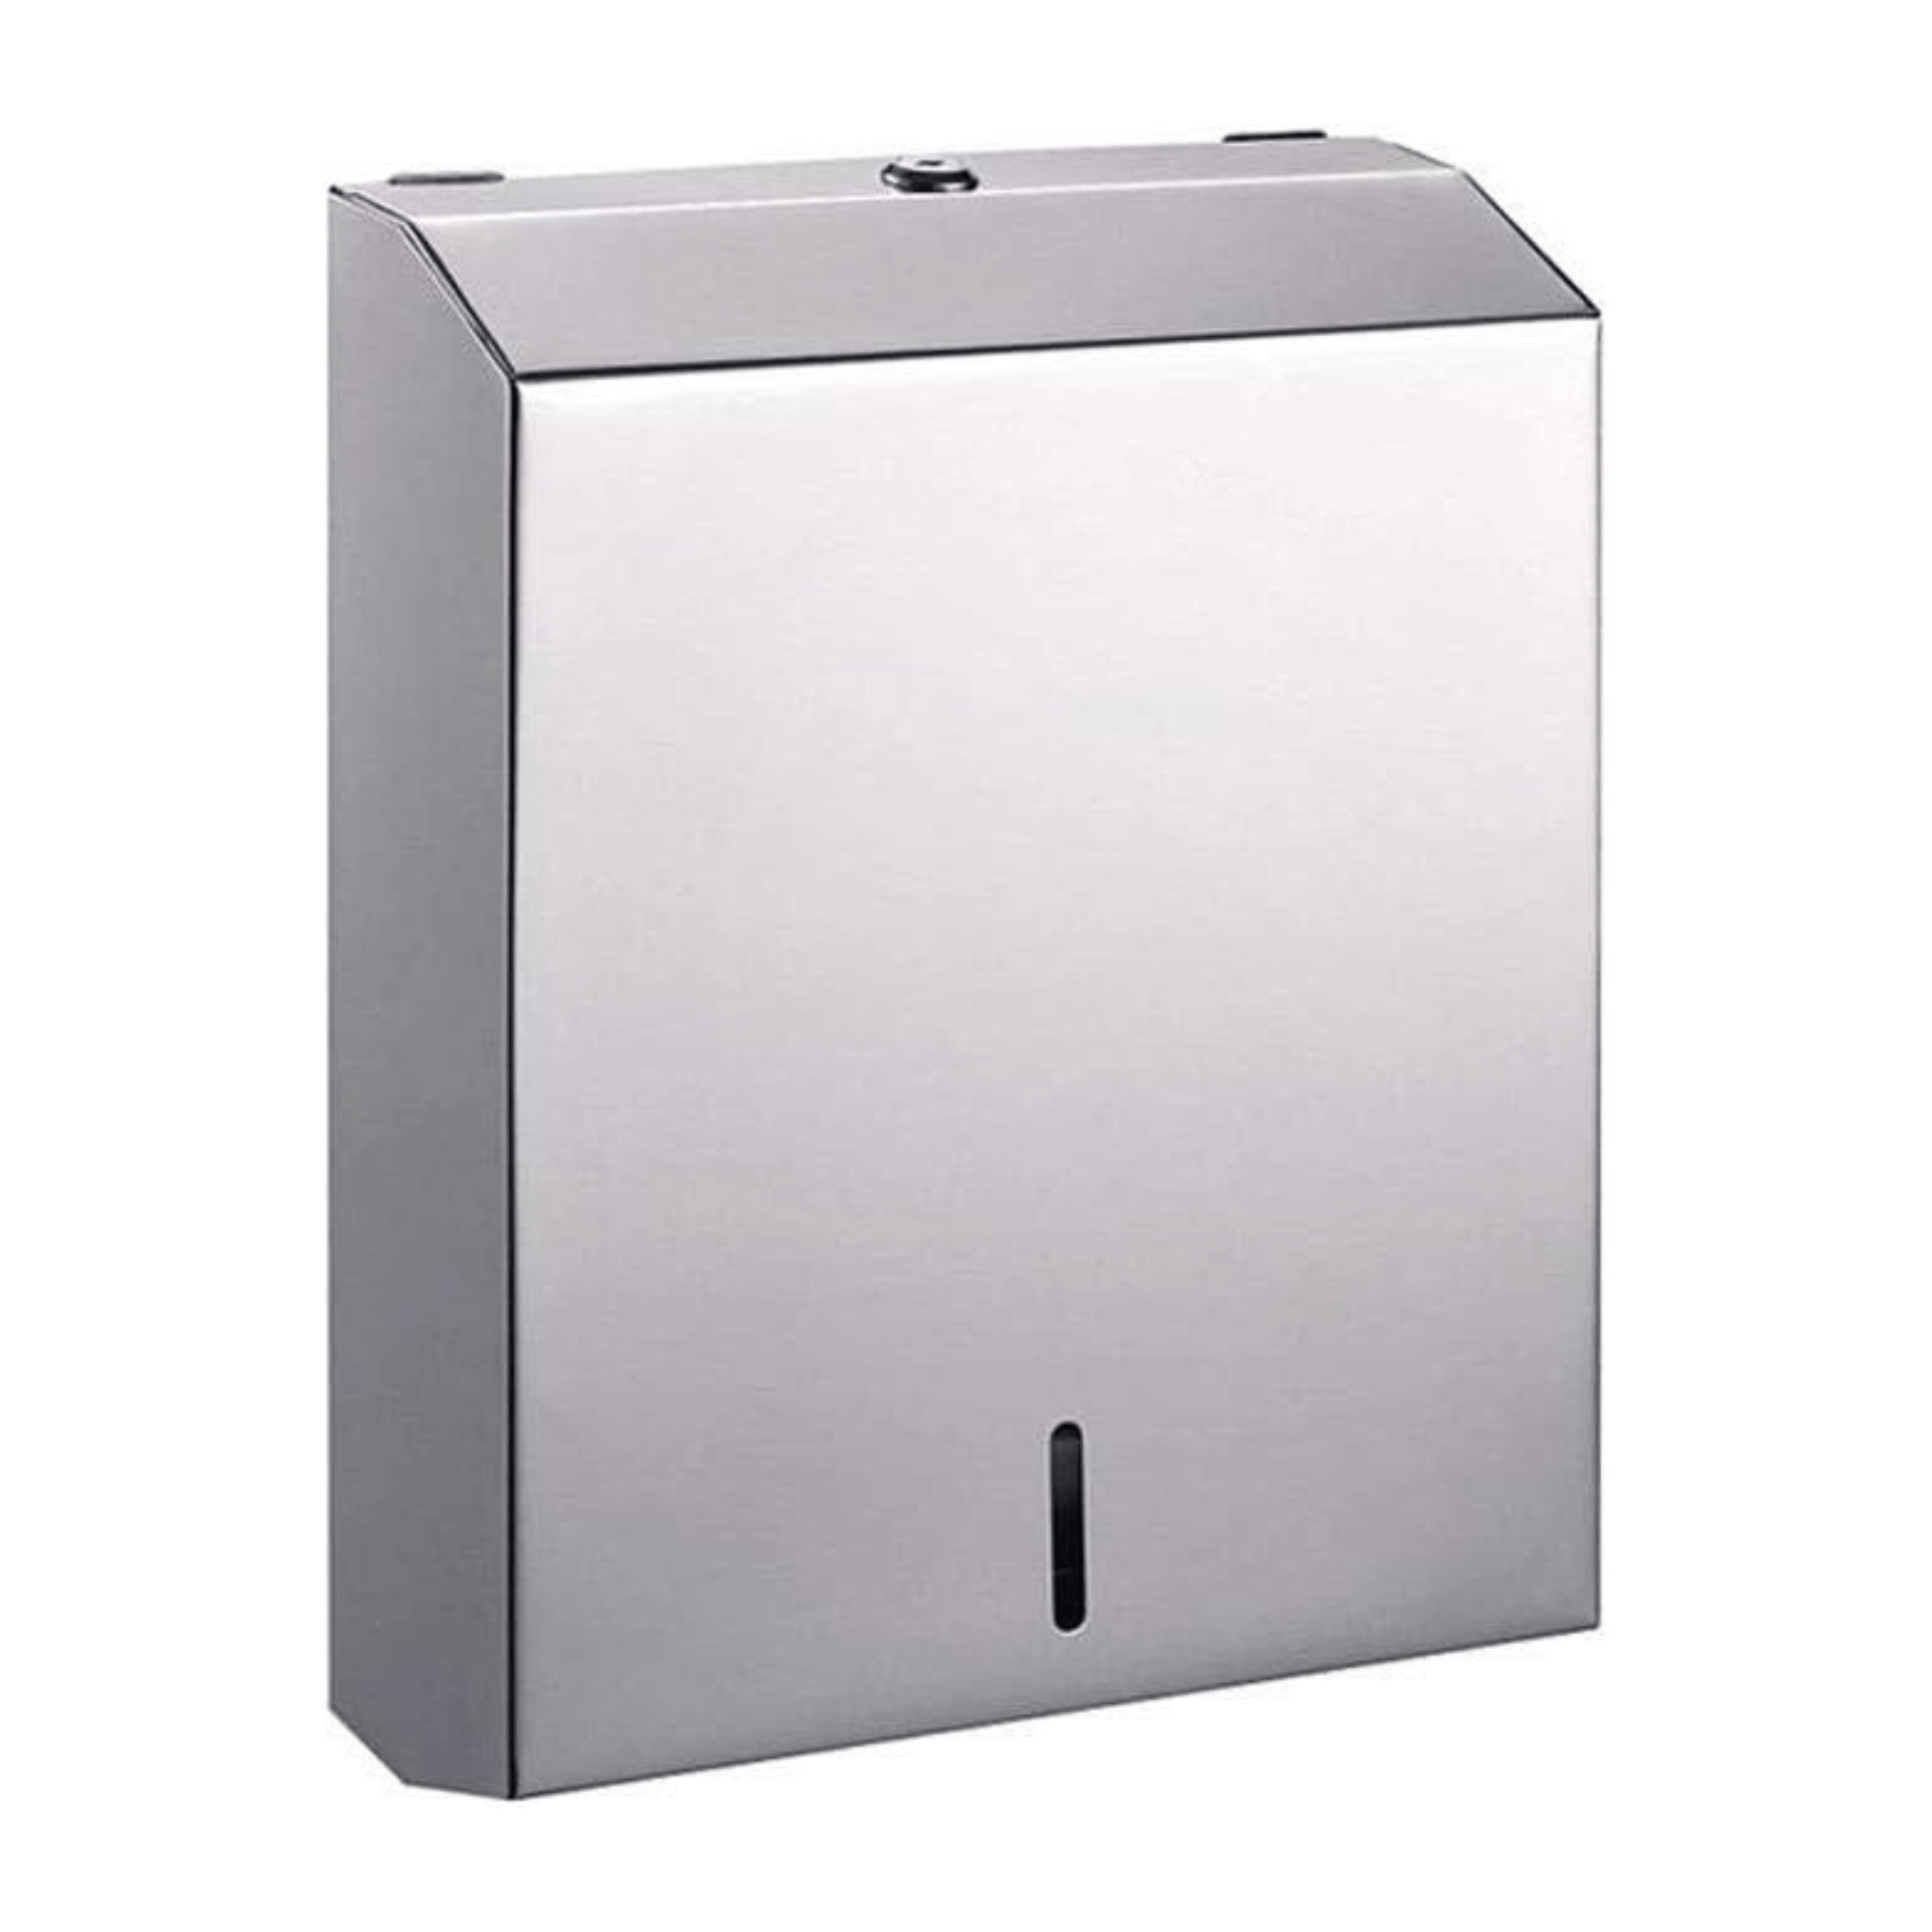 Shop Bathroom Stainless Steel Chrome Toilet Tissue Paper Holder - 8223 | Buy Online at Supply Master Accra, Ghana Bathroom Accessories Buy Tools hardware Building materials